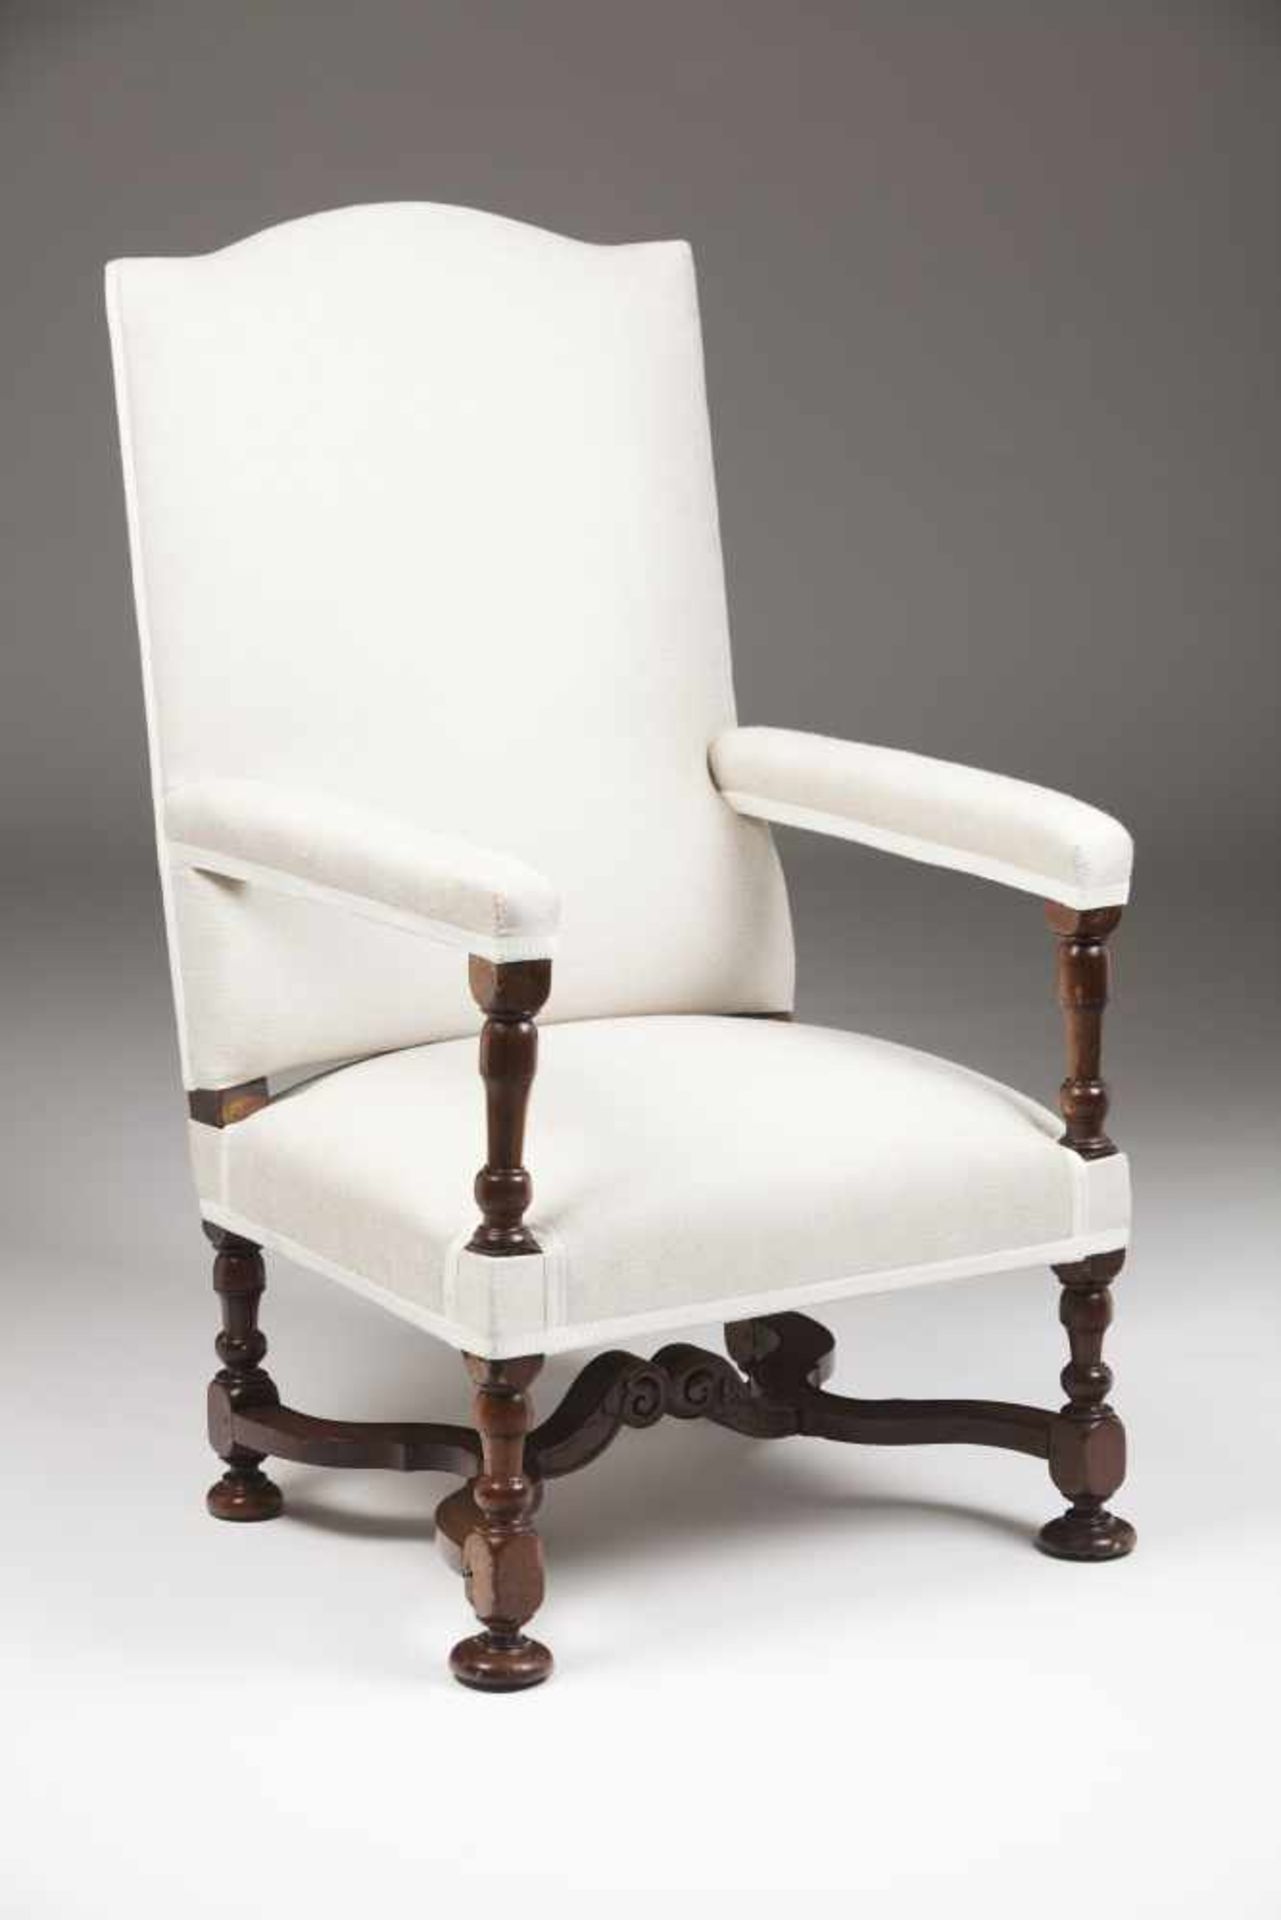 A Queen Anne library armchairWalnutTurned arms and legs, "X" shaped stretchersFabric up